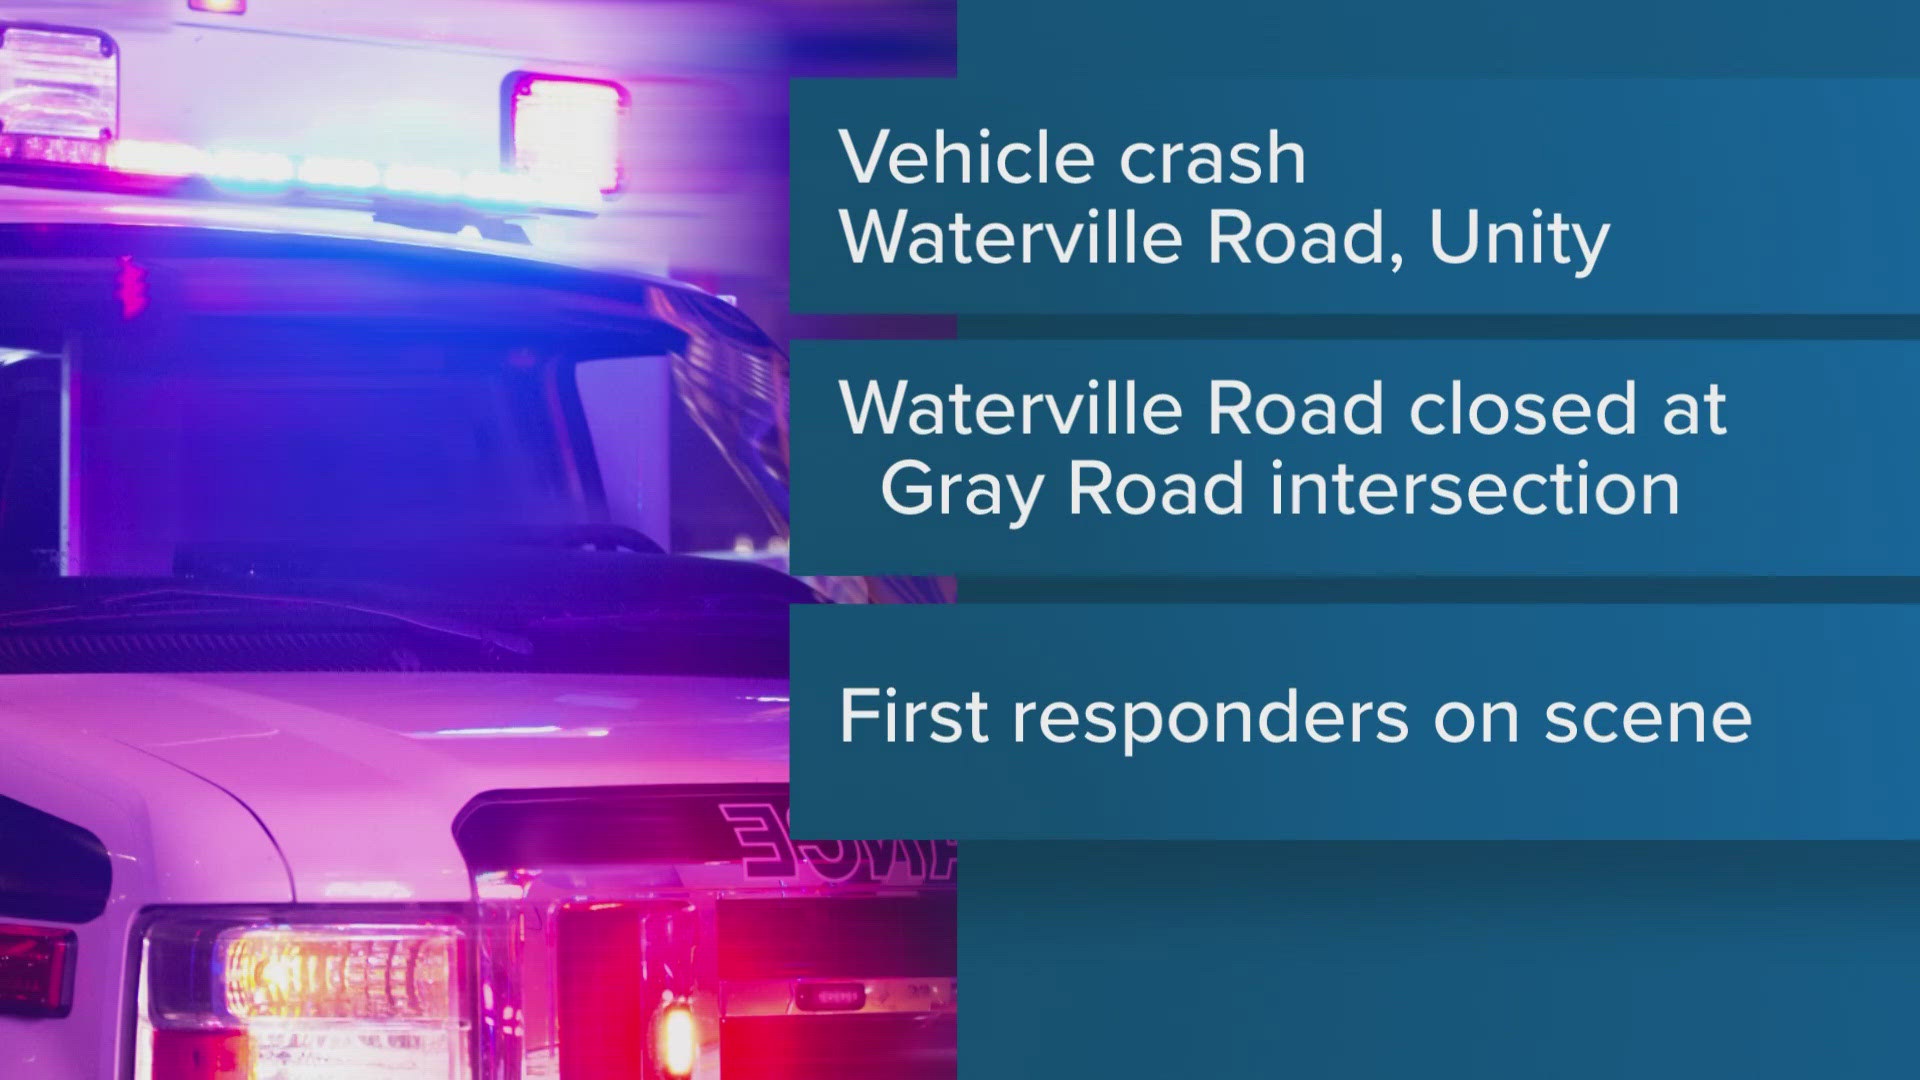 Emergency officials have responded to the scene of a crash on Waterville Road in Unity Township.